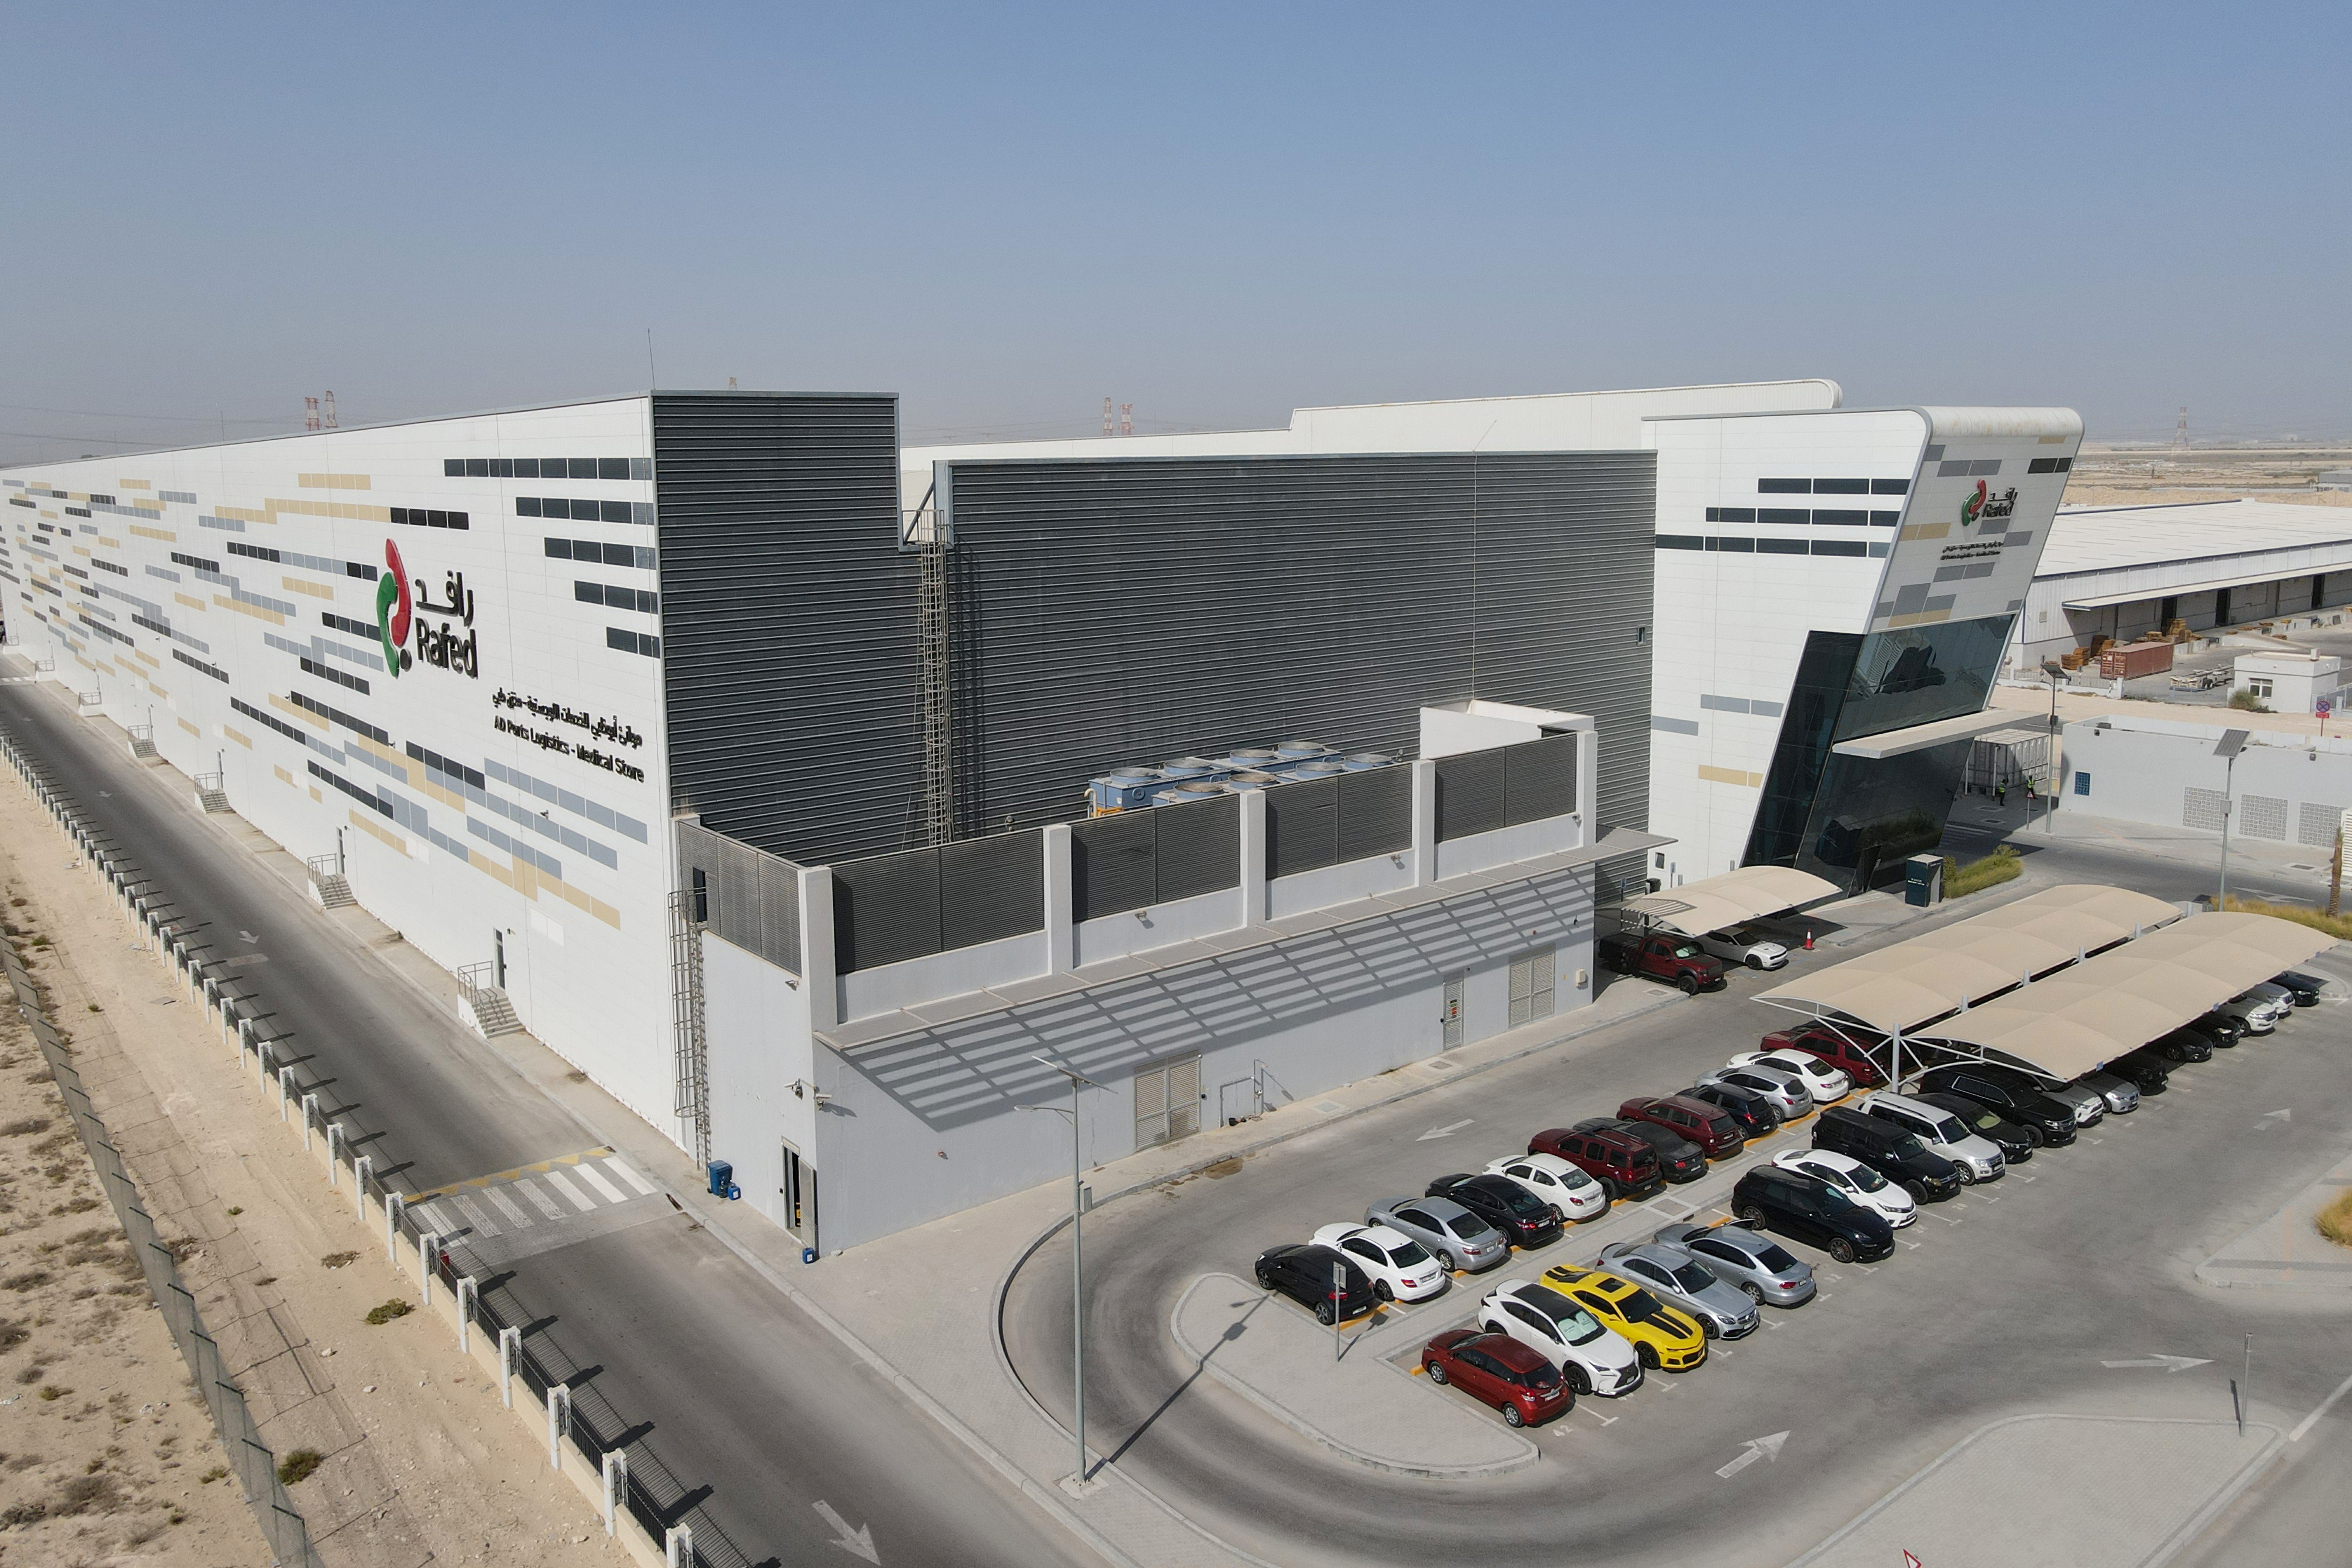 A general view shows the Hope Consortium building where COVID-19 vaccines are stored to be shipped to different countries, in Abu Dhabi